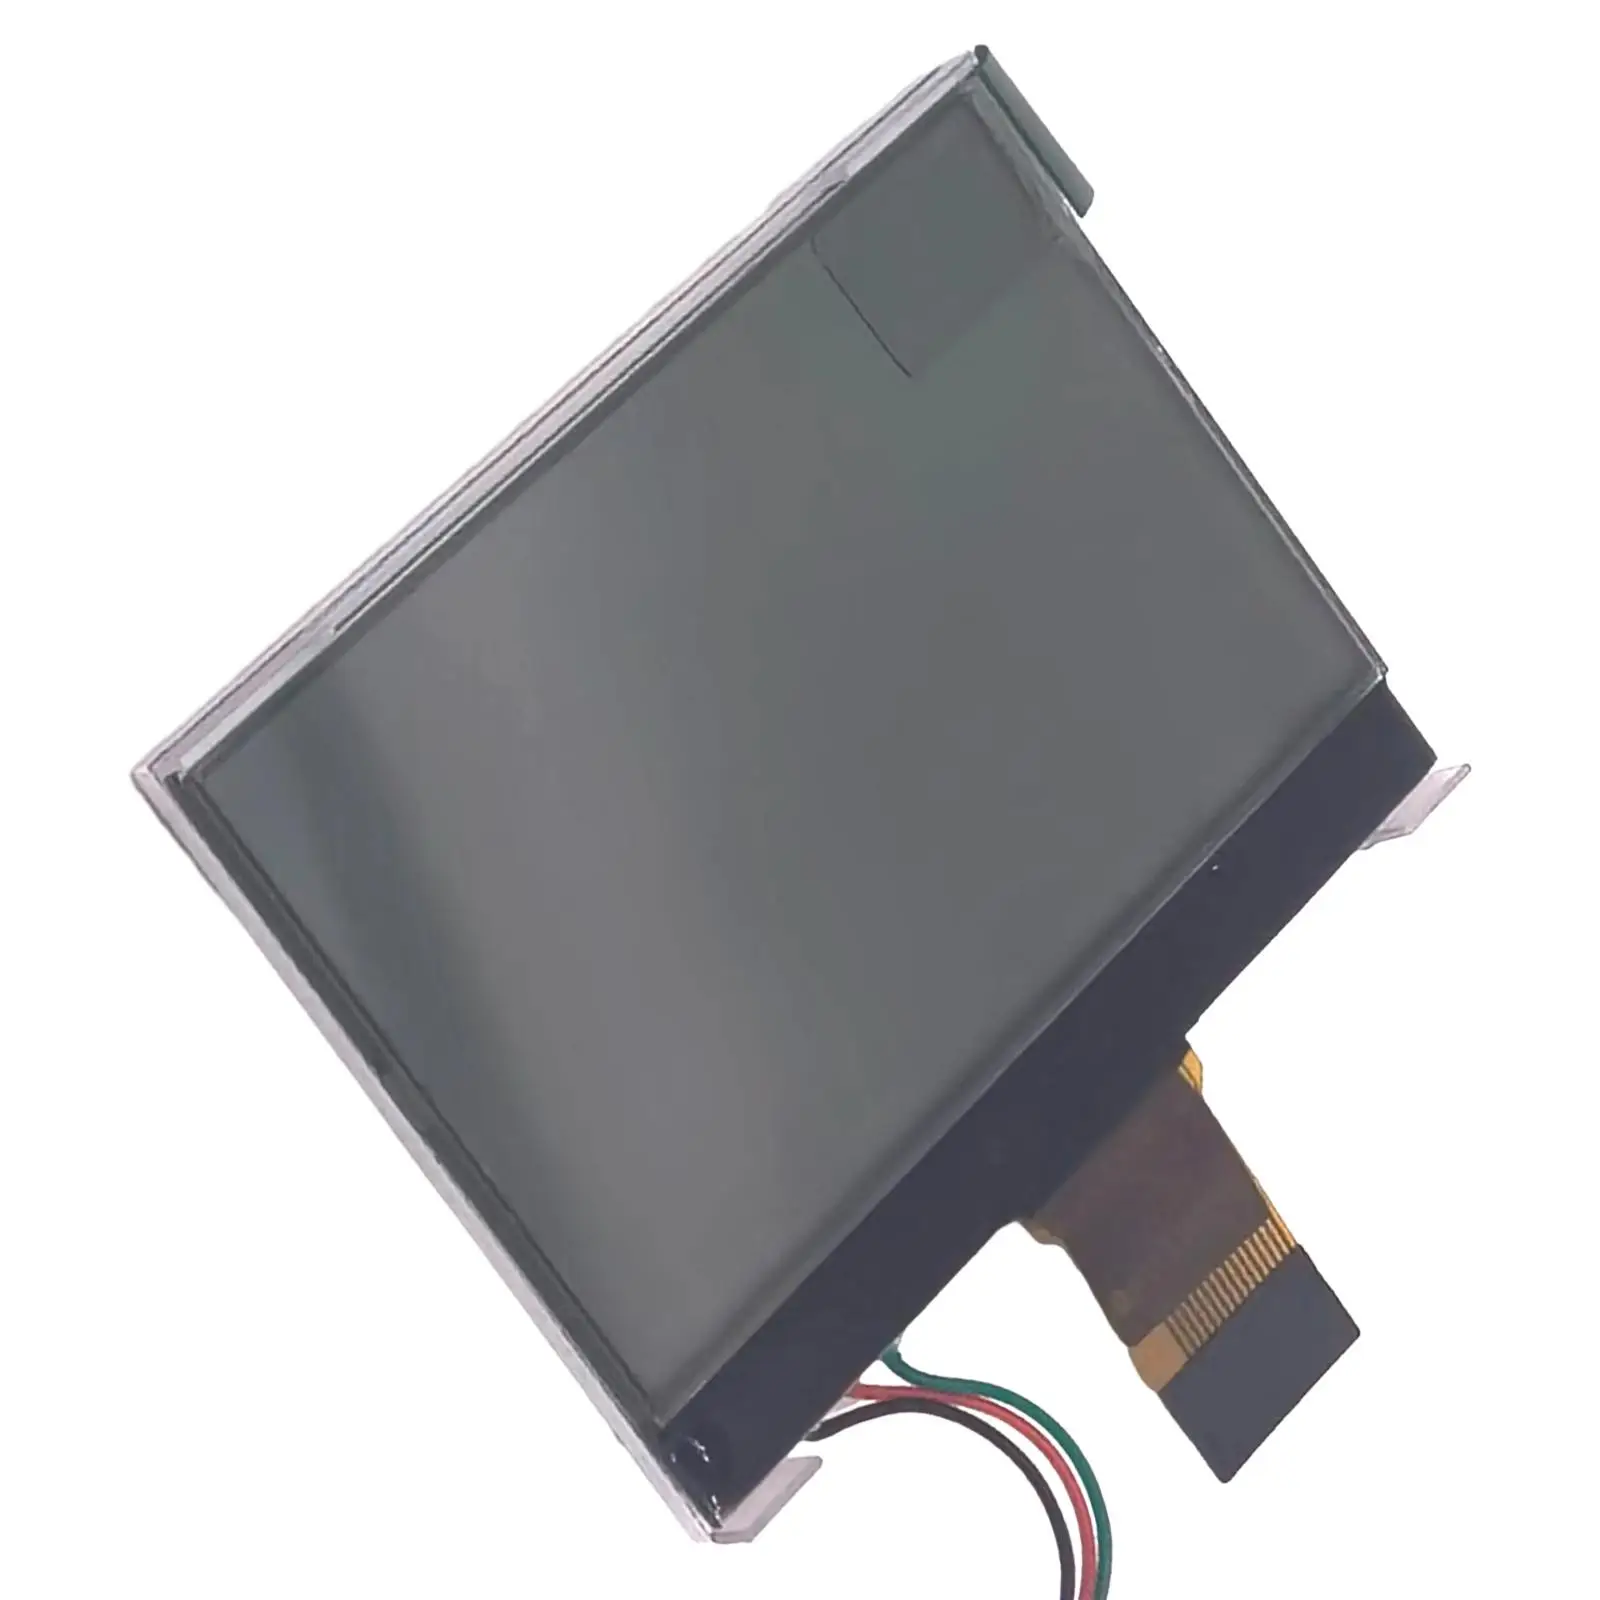 LCD Display Screen High Quality Glass Replacement Parts Durable Professional for V1 V860III Flash Repair Part Components